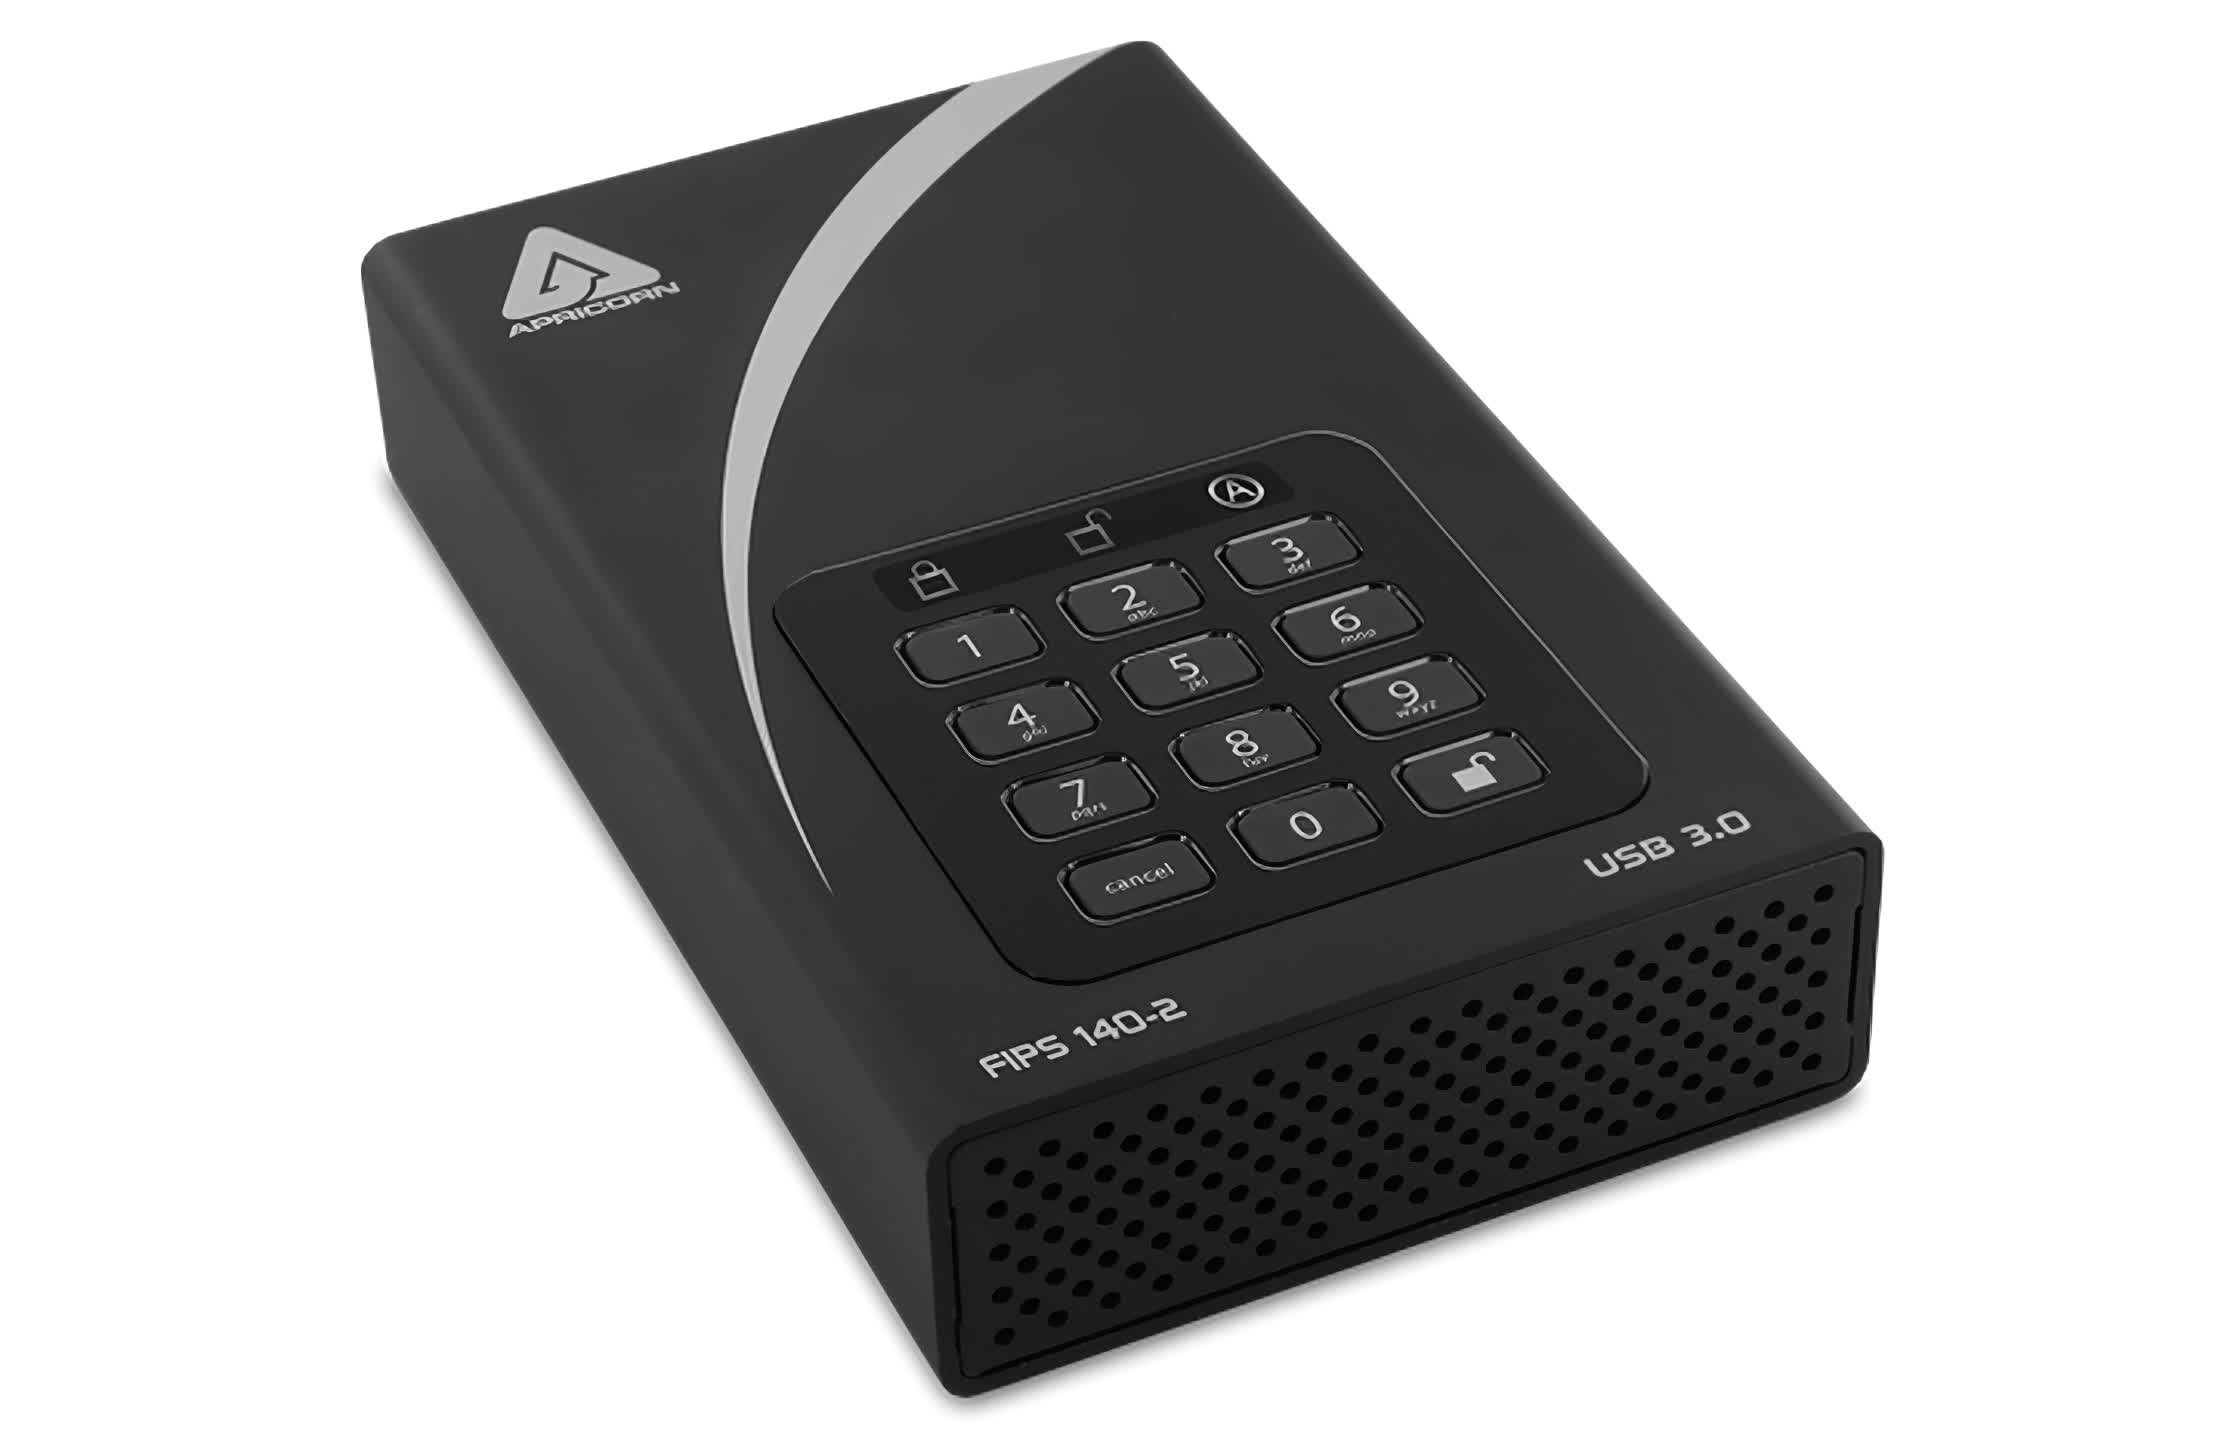 Apricorn launches the world's largest and possibly most secure external HDD